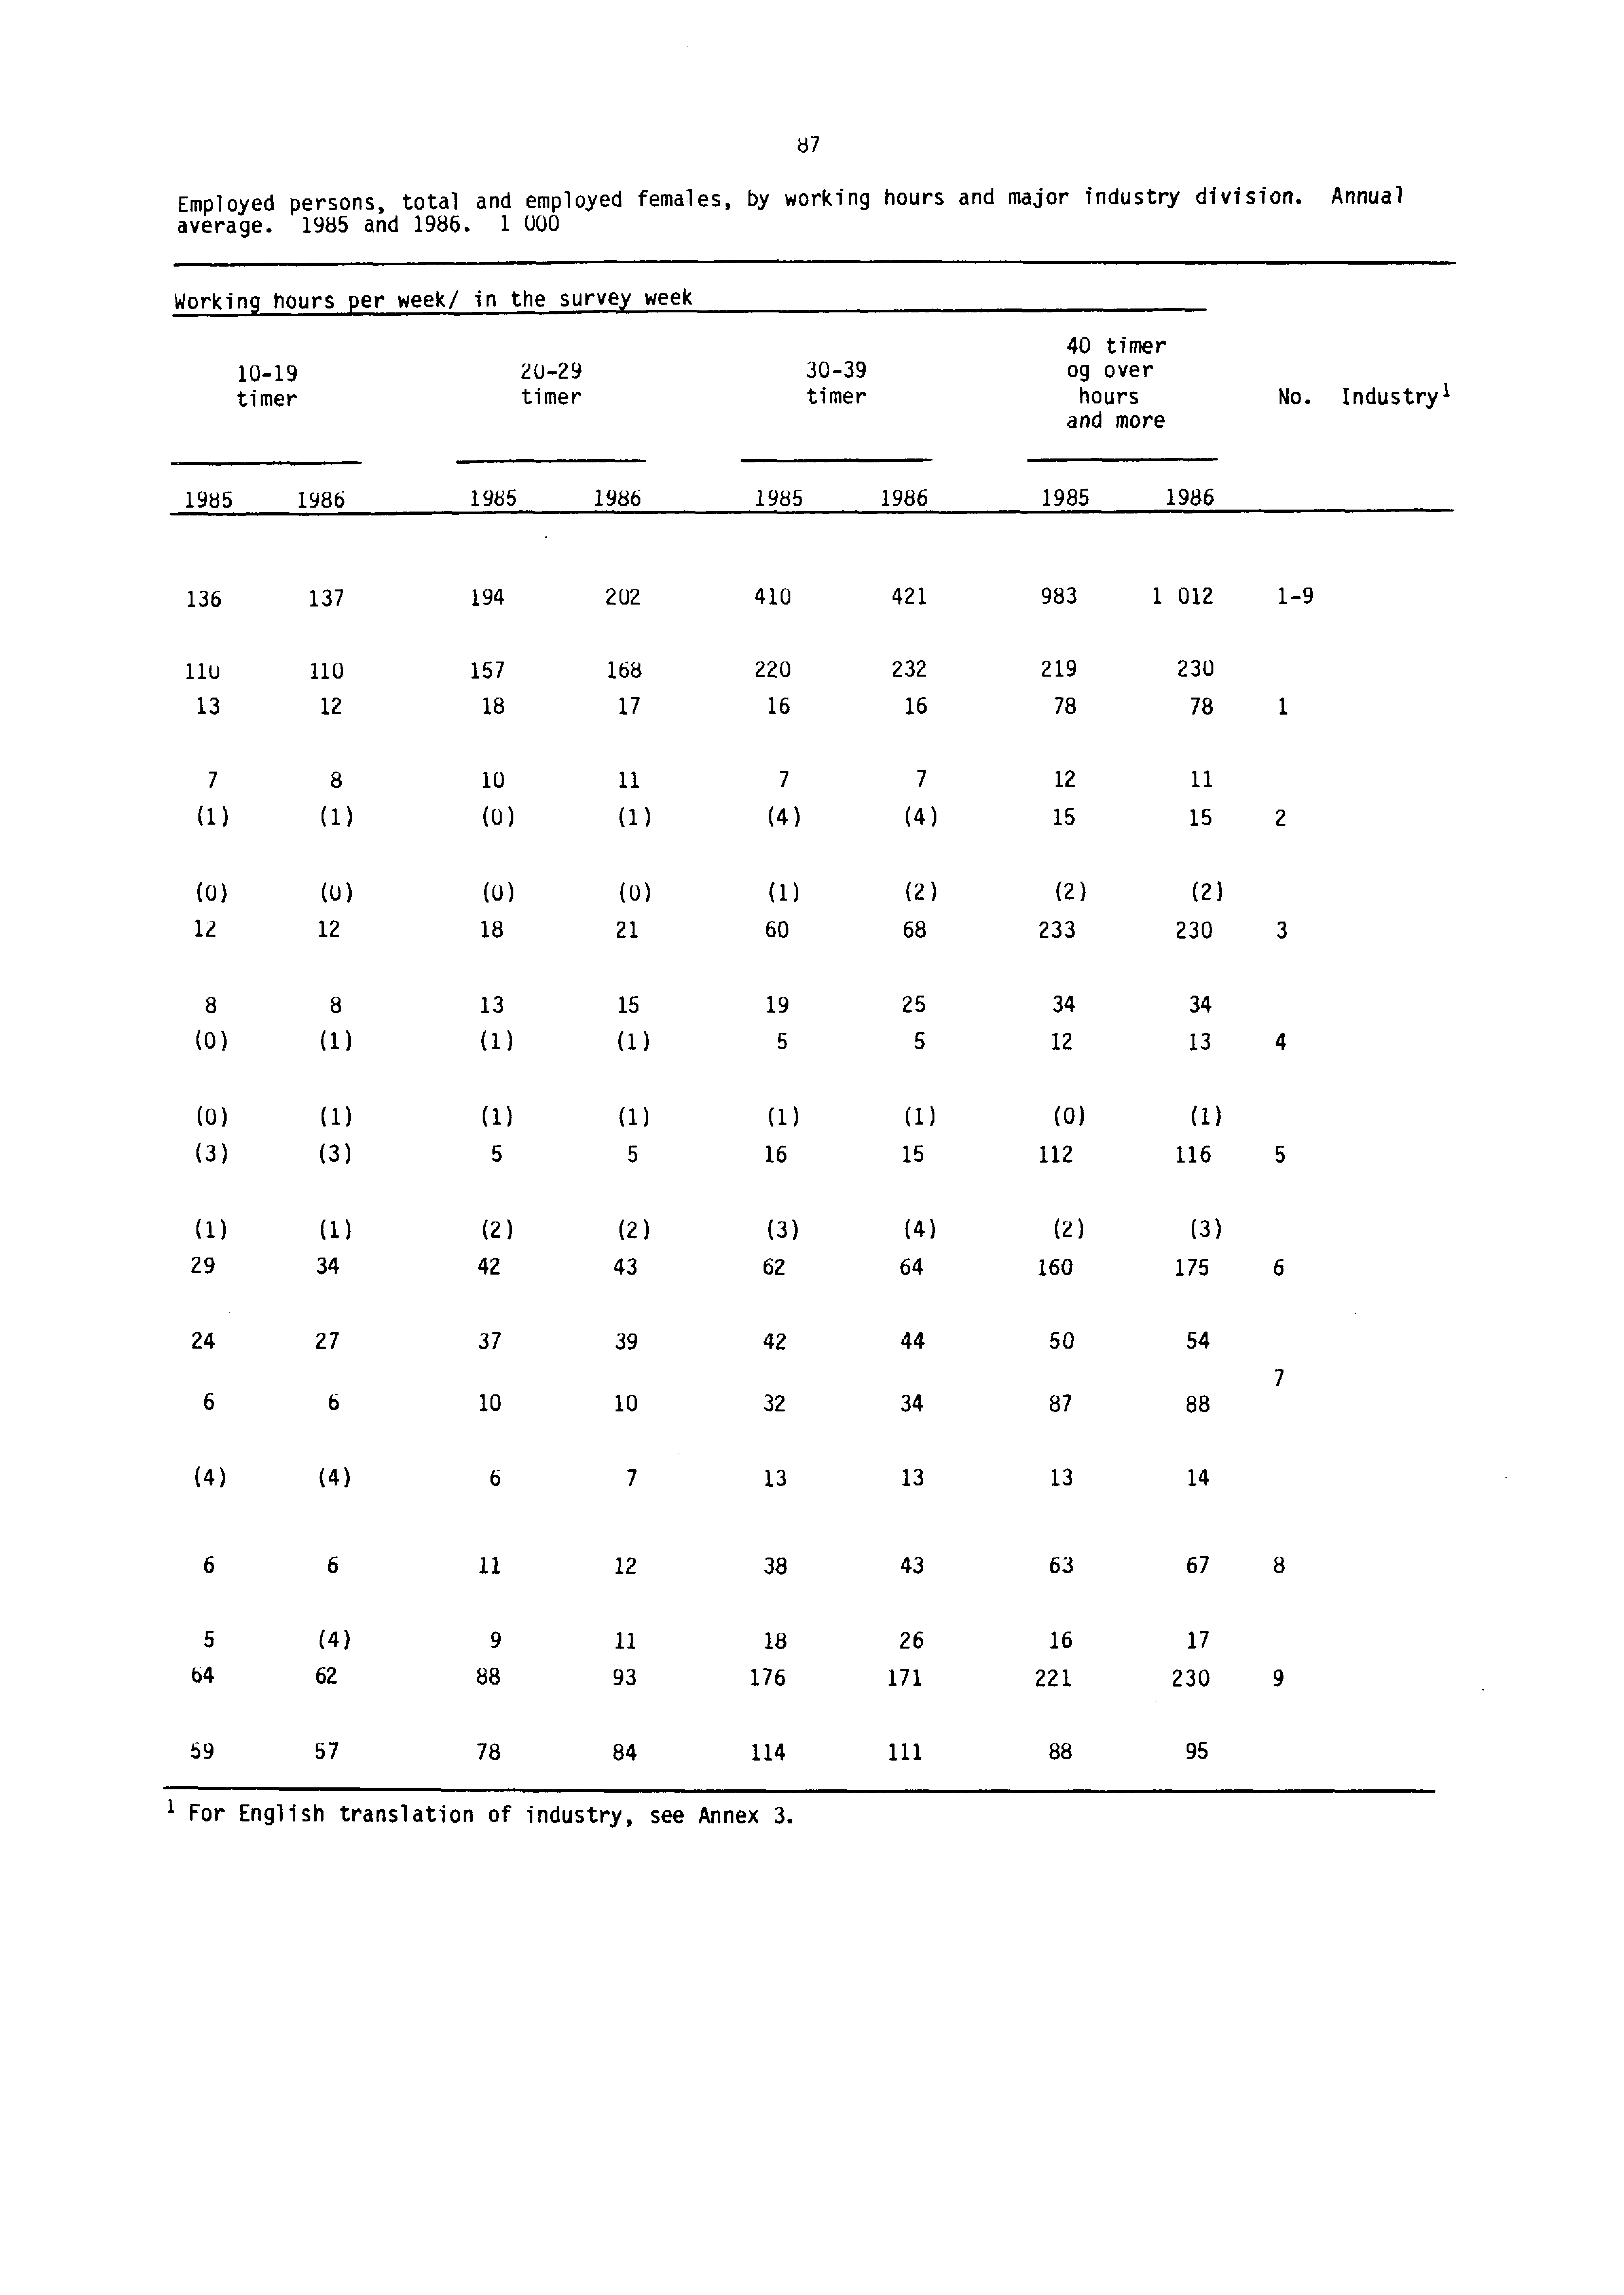 Employed persons, total and employed females, by working hours and major industry division. Annual average. 1985 and 1986.